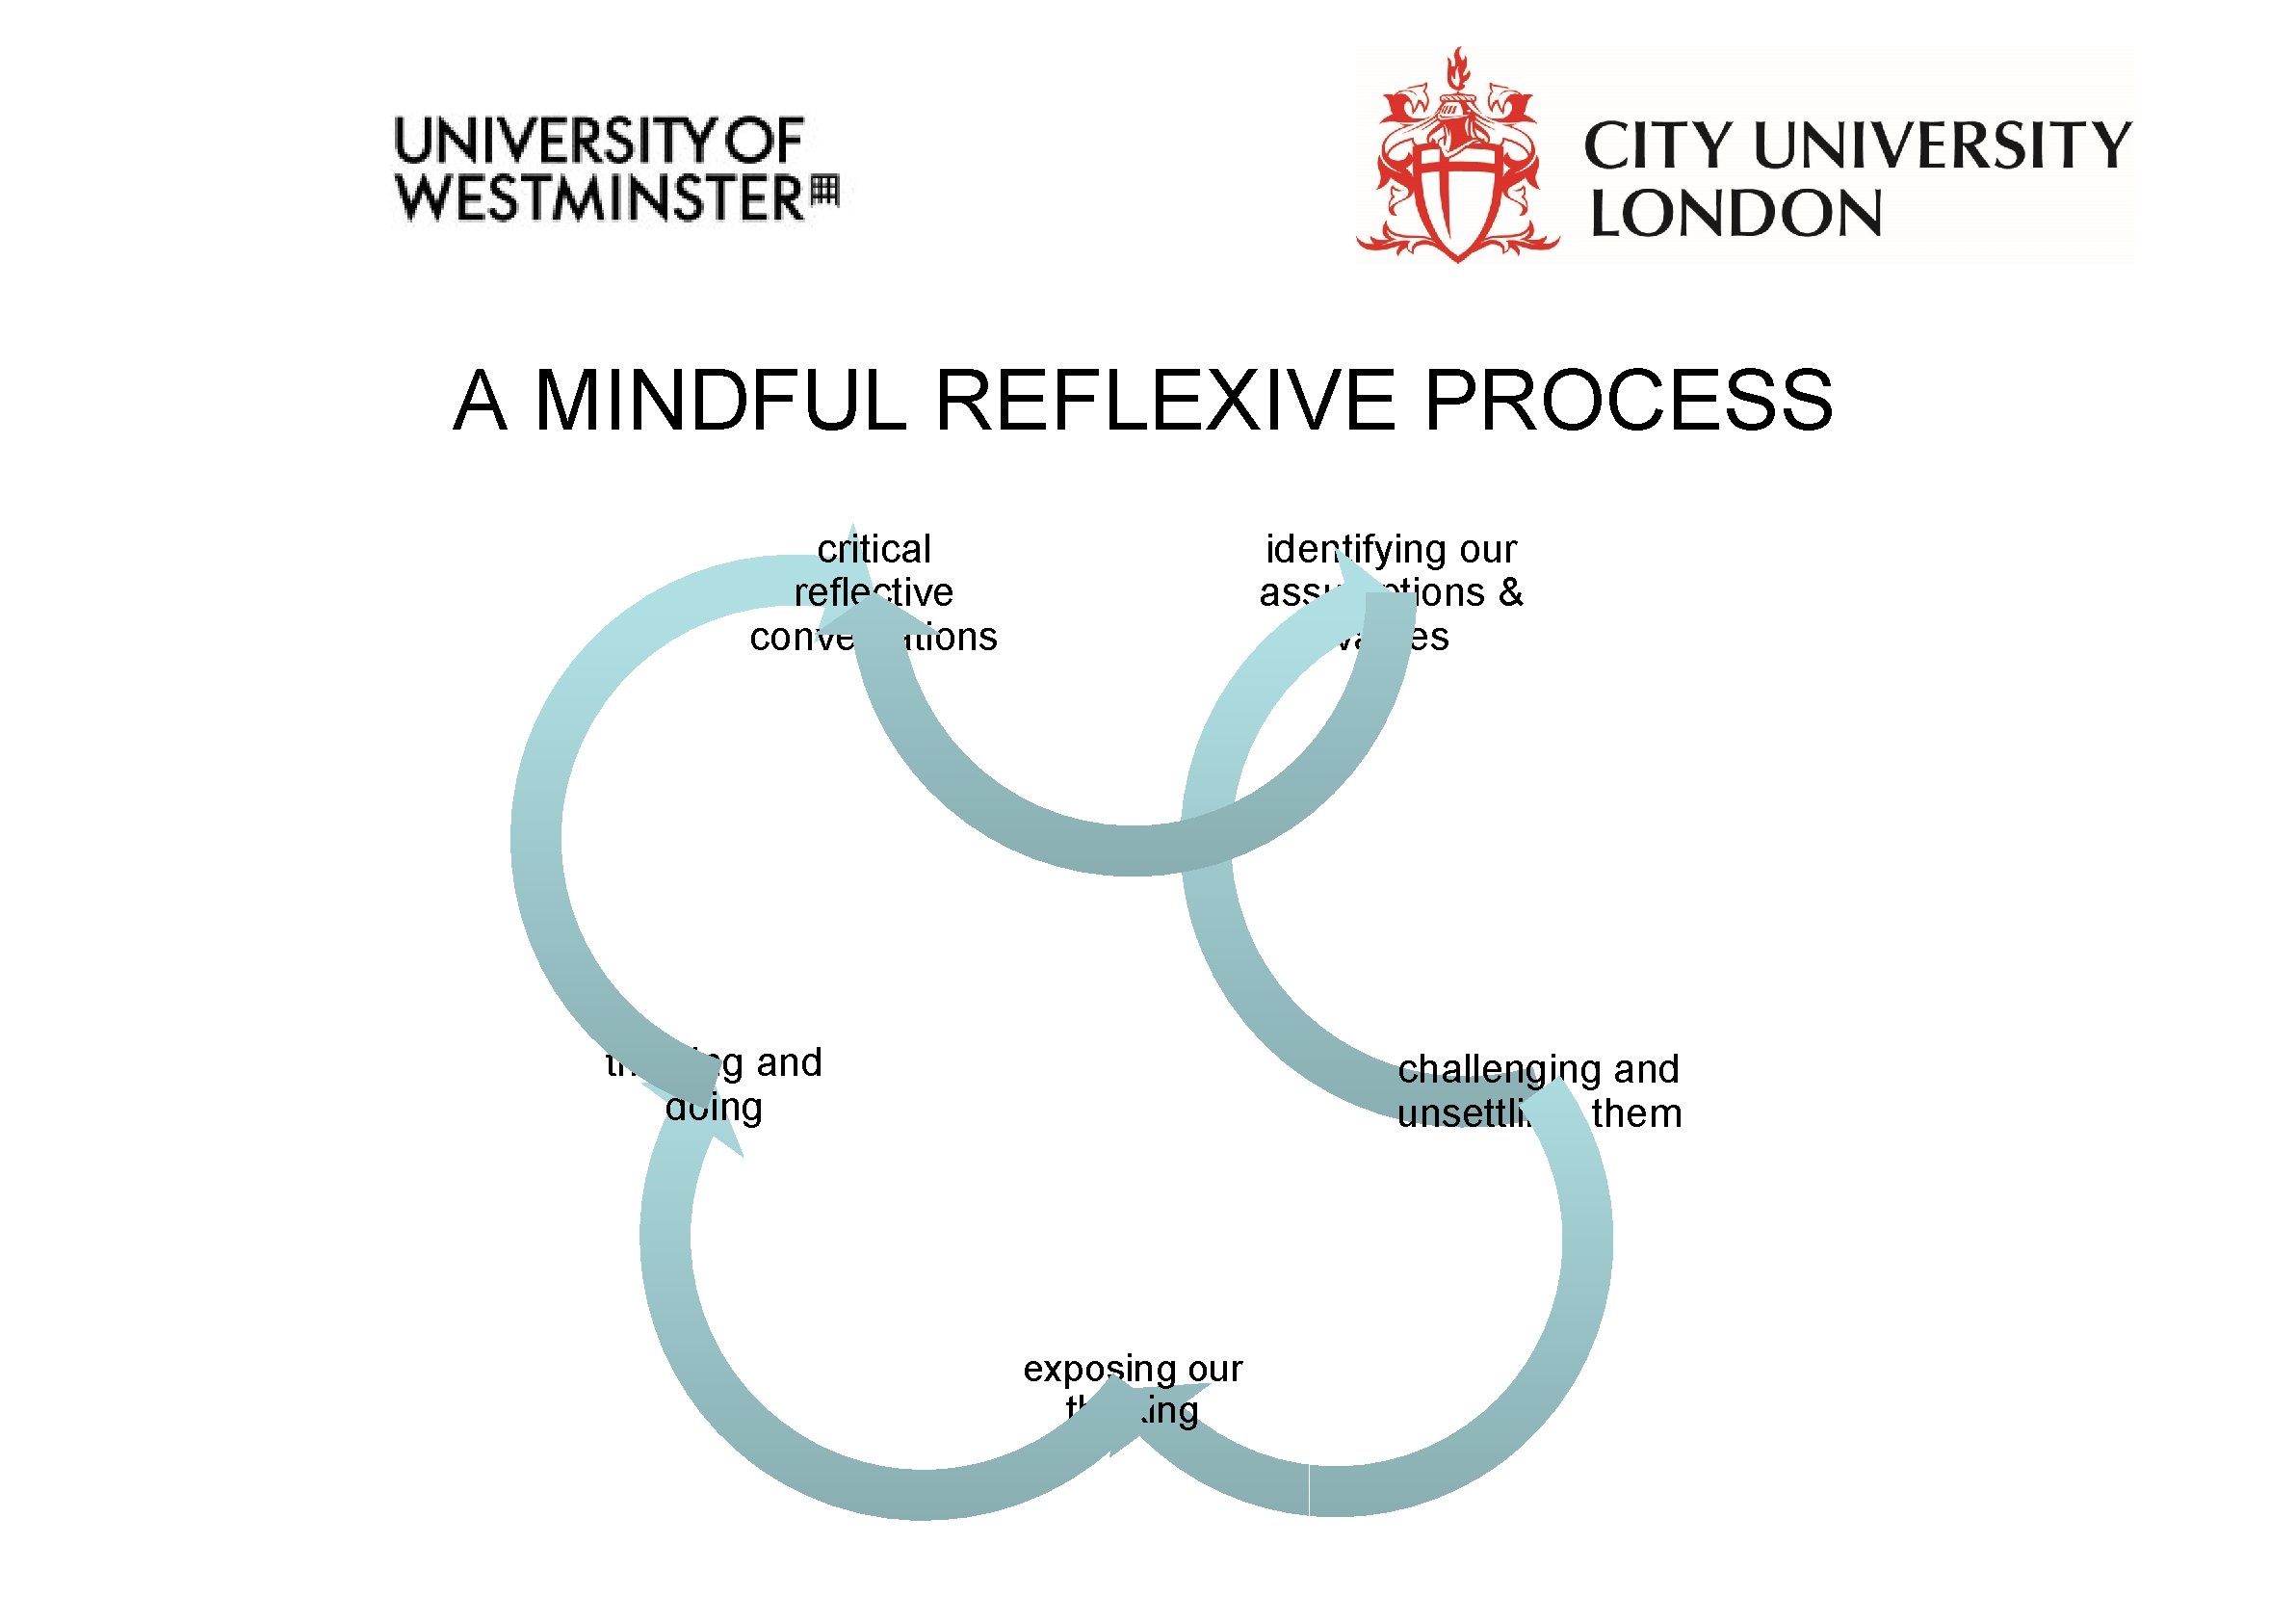 A MINDFUL REFLEXIVE PROCESS critical reflective conversations identifying our assumptions & values thinking and